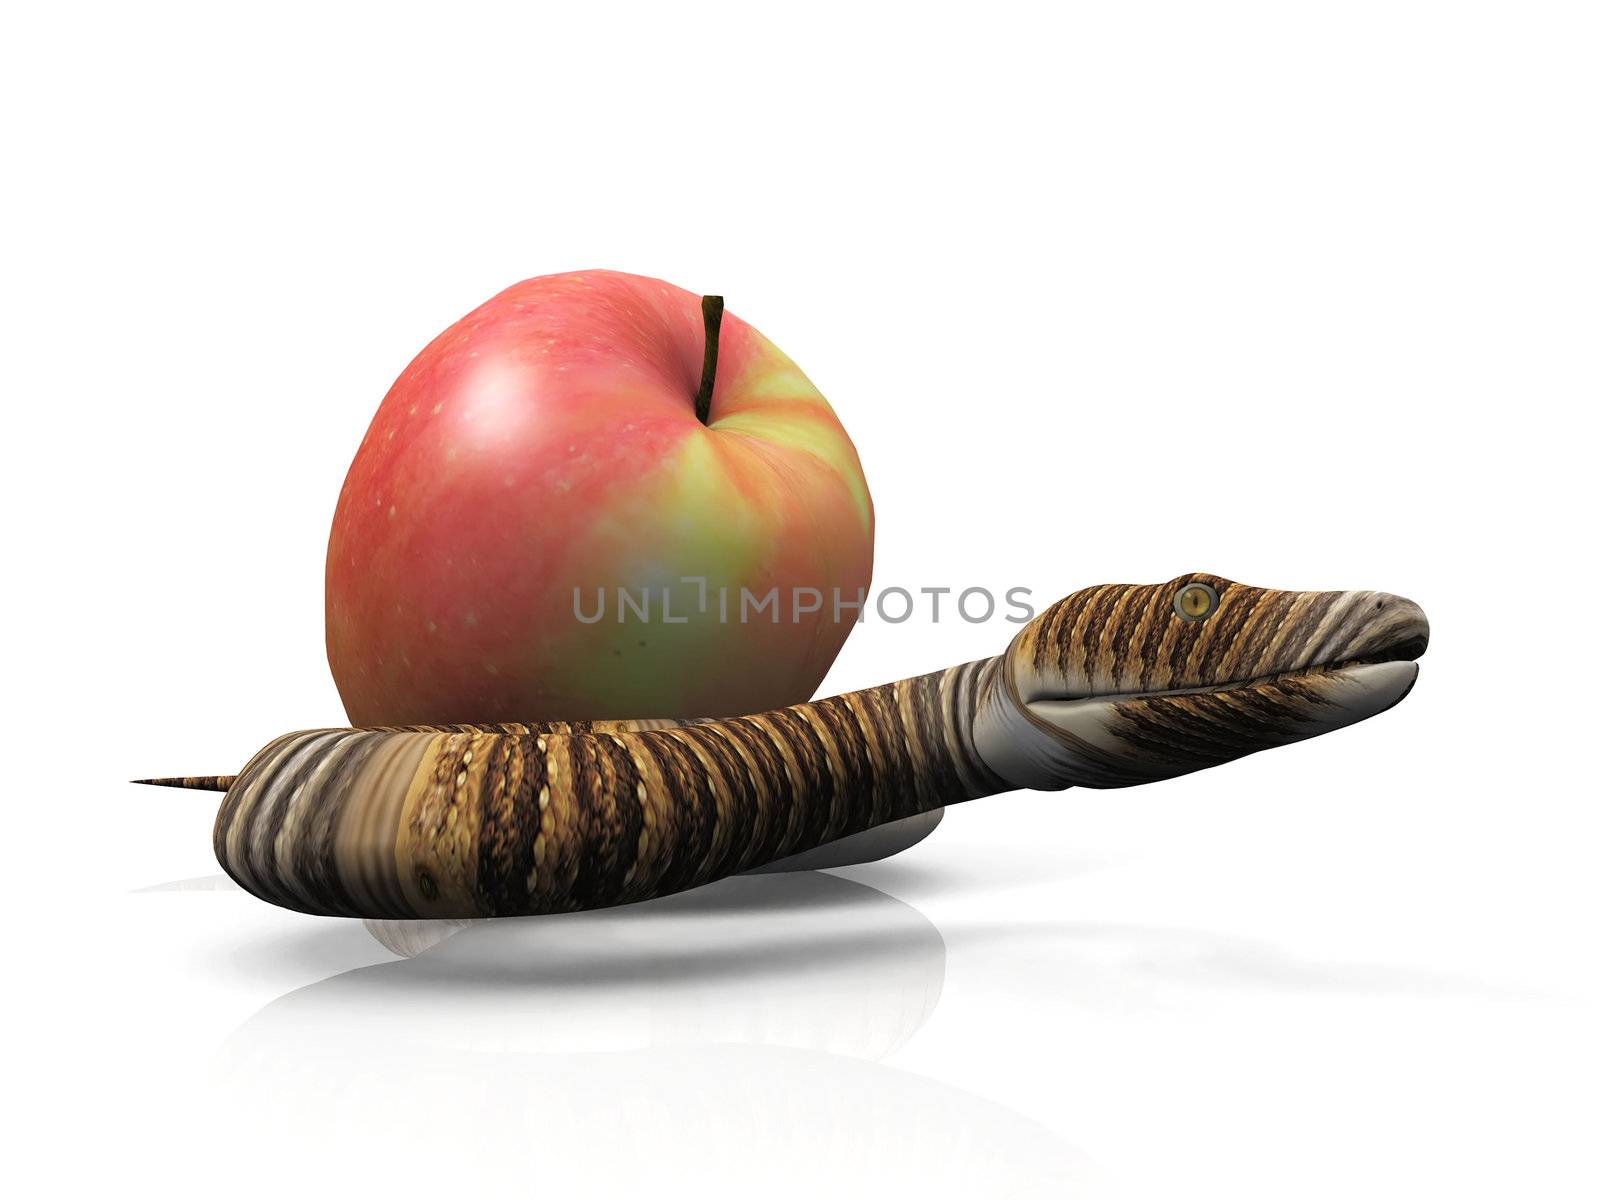 the snake and the apple